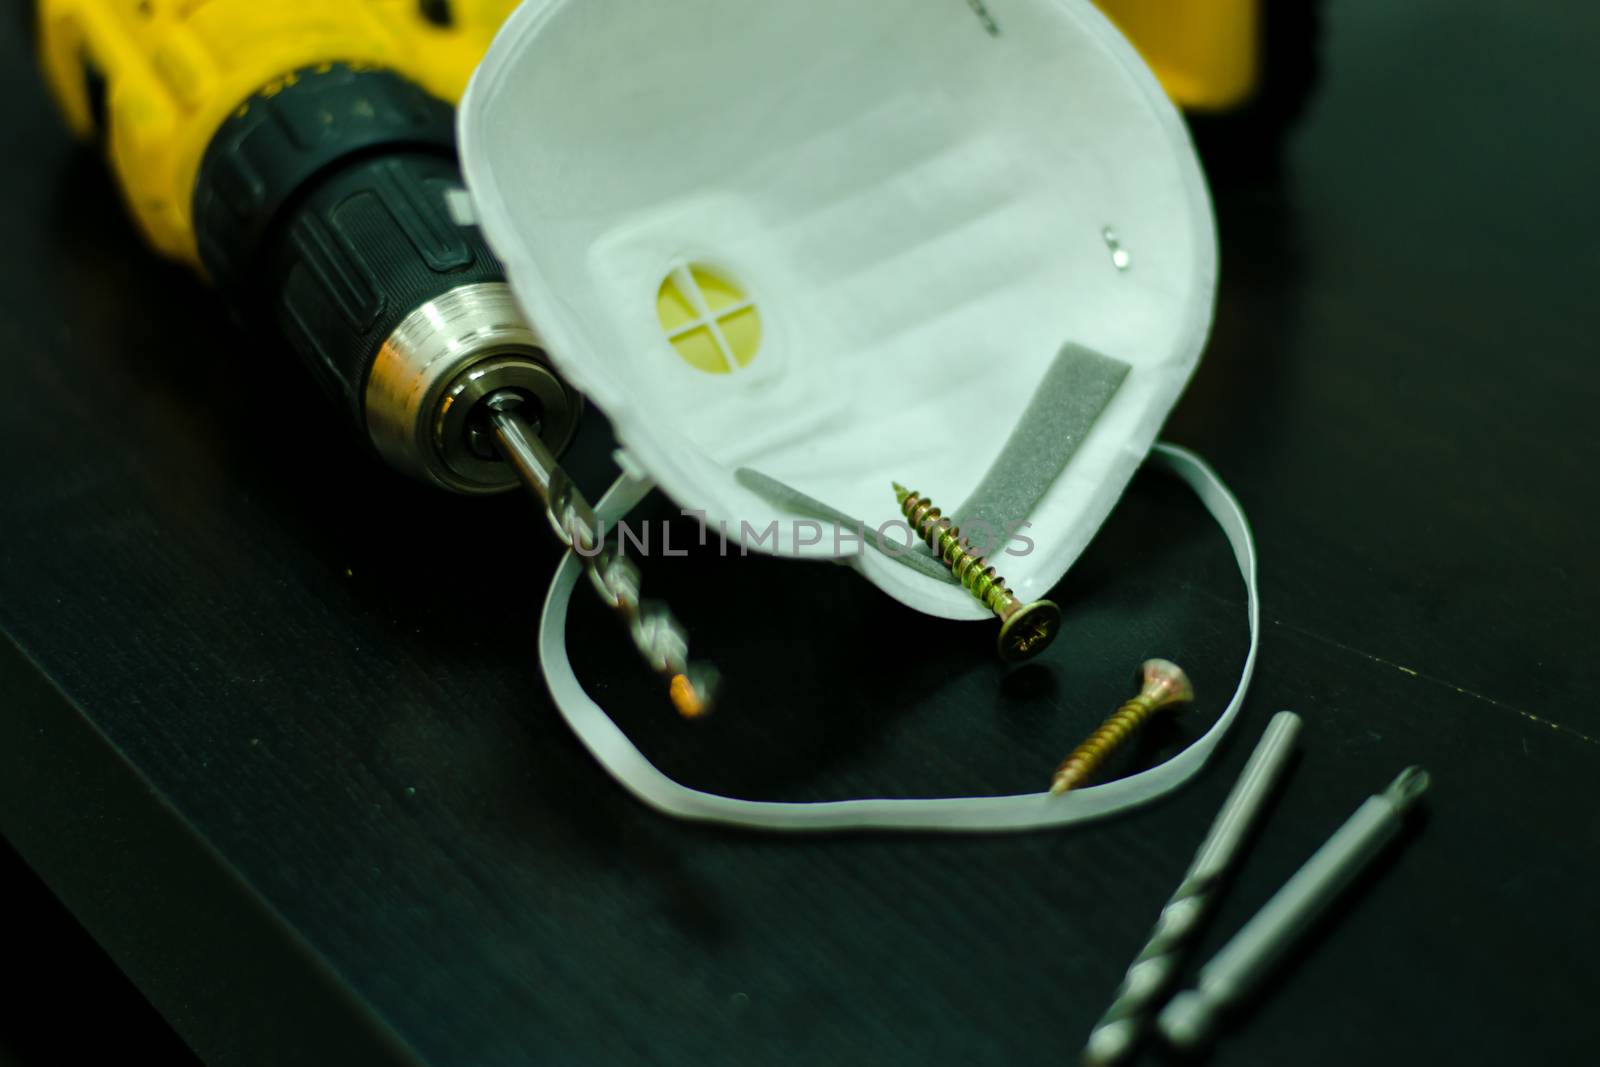 drill, respirator and screws on the table by jk3030